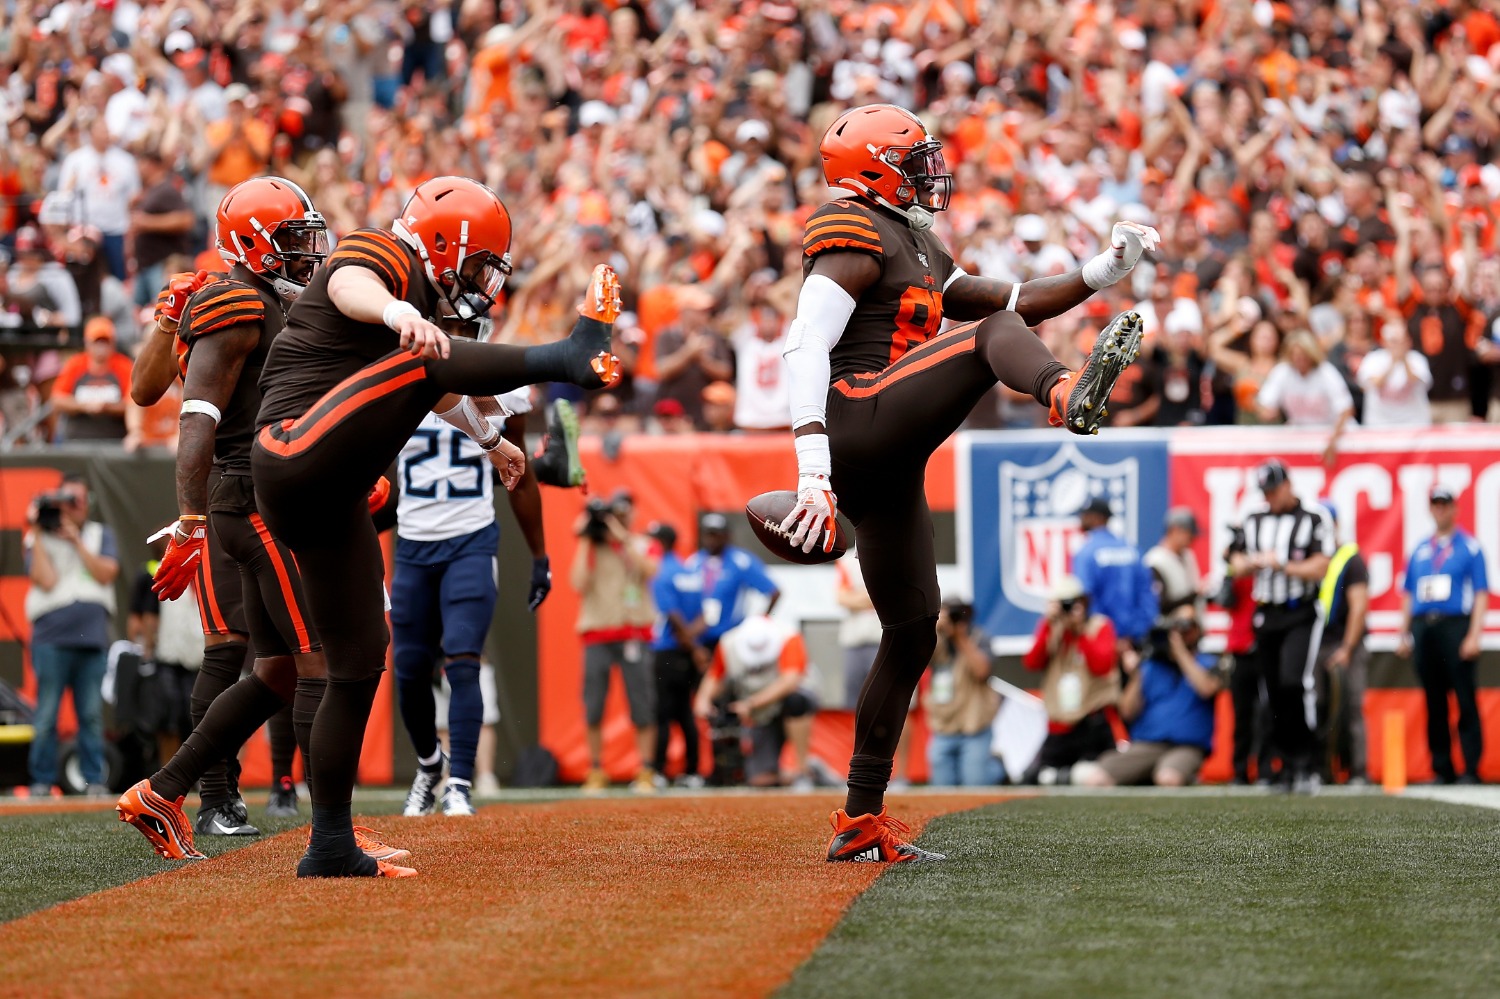 David Njoku and Baker Mayfield may have connected on their last throw and catch if the Cleveland Browns grant Njoku's trade request.